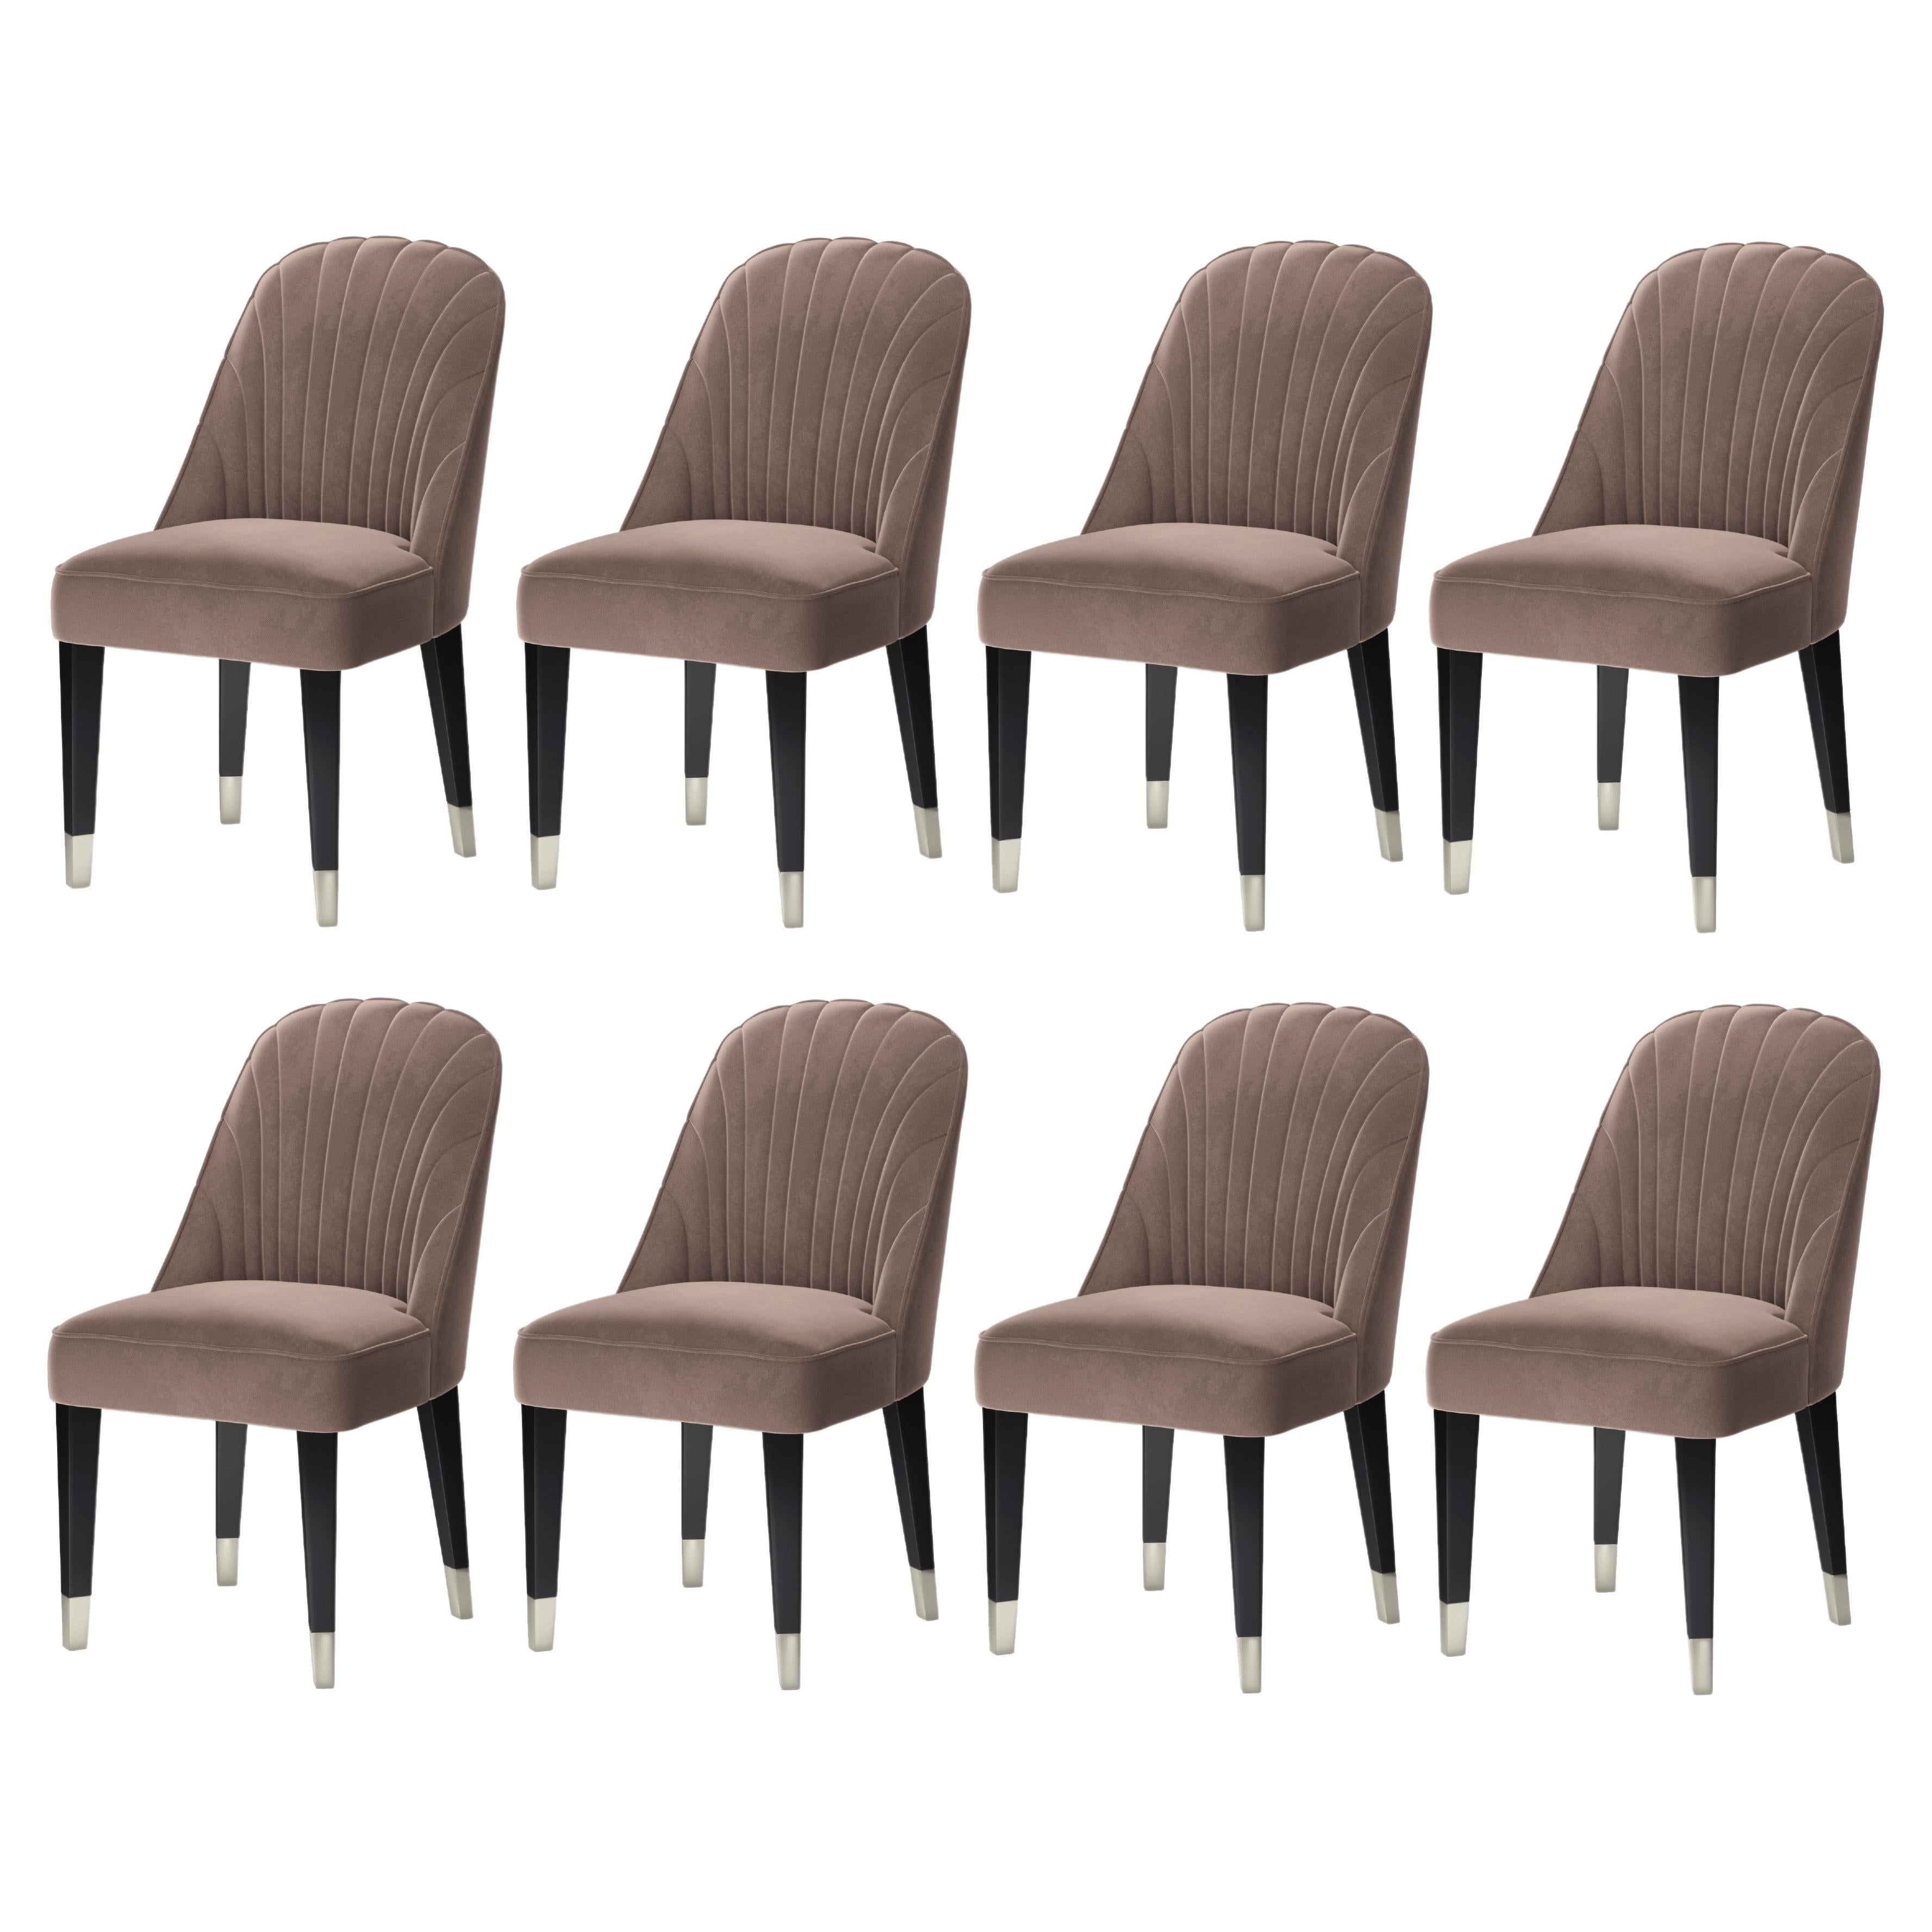 Contemporary Dining Chairs Offered in Lavender Velvet, Set of 8 For Sale